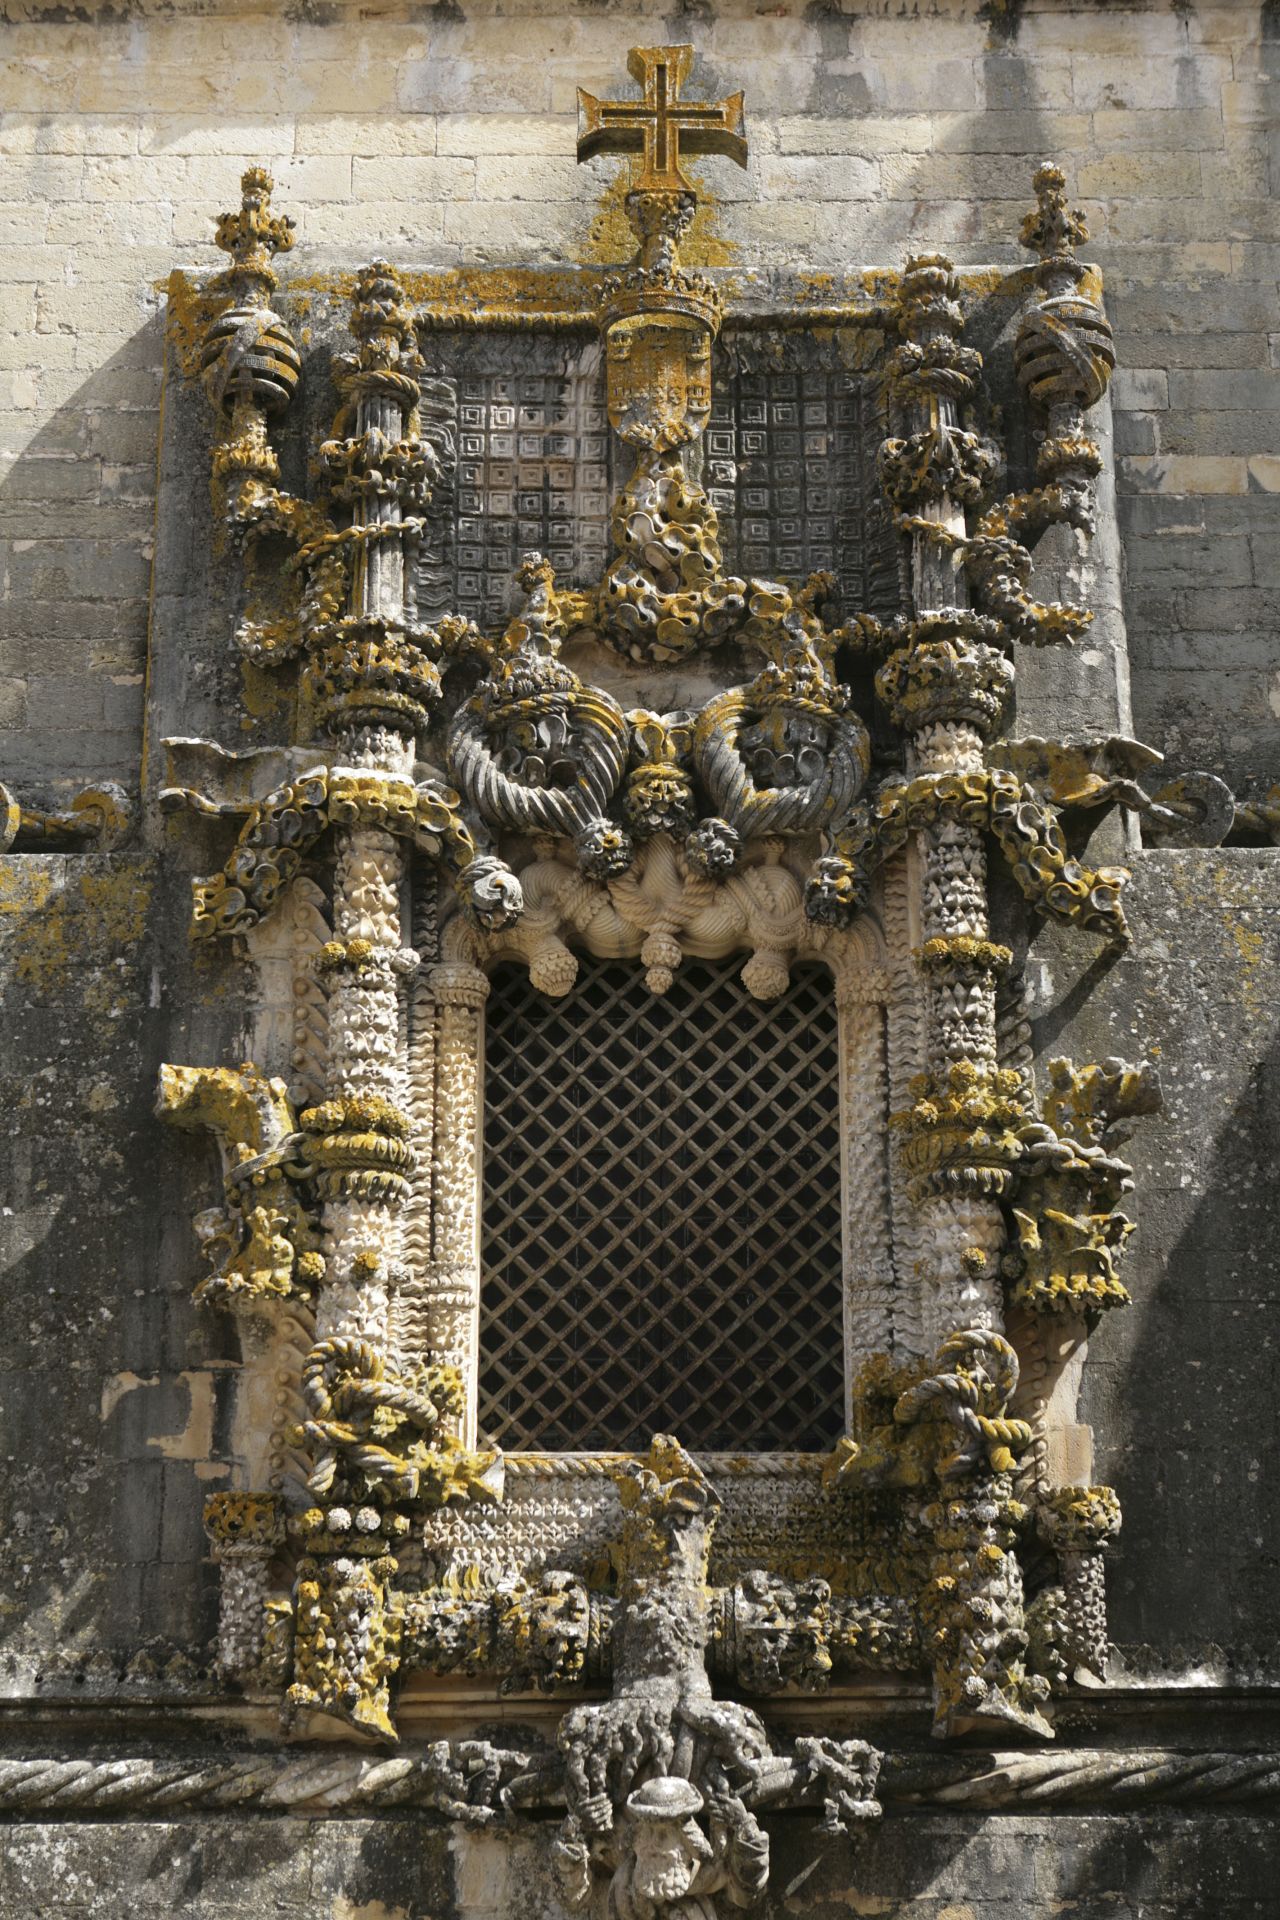 Templar stronghold: The Convent of Christ in Tomar.